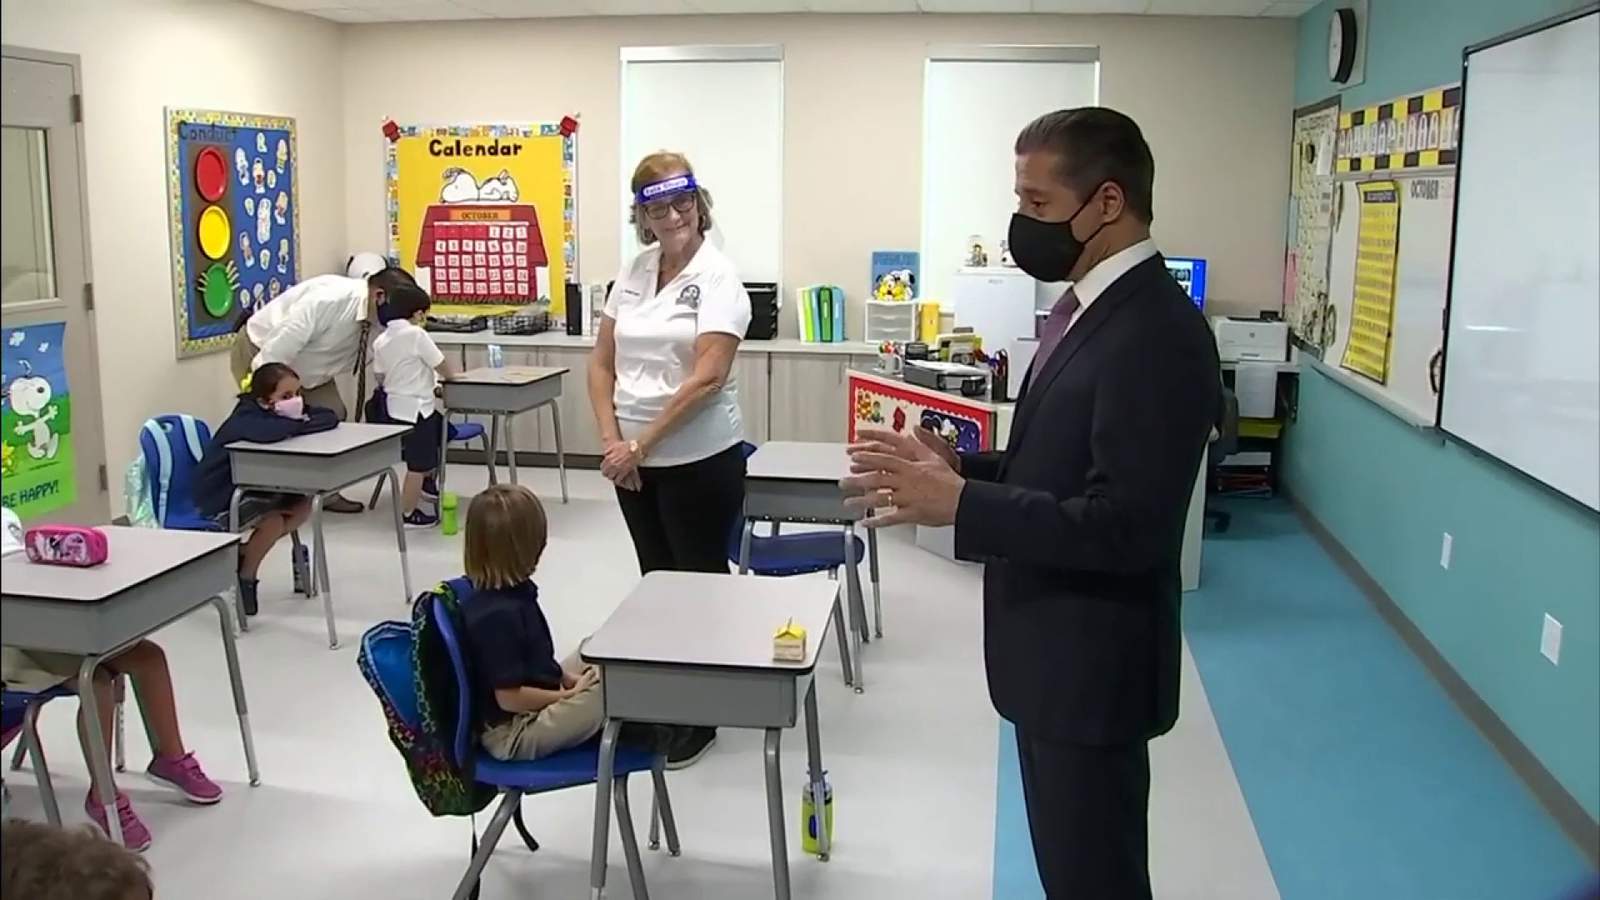 About 22,000 students return to classrooms in Miami-Dade County